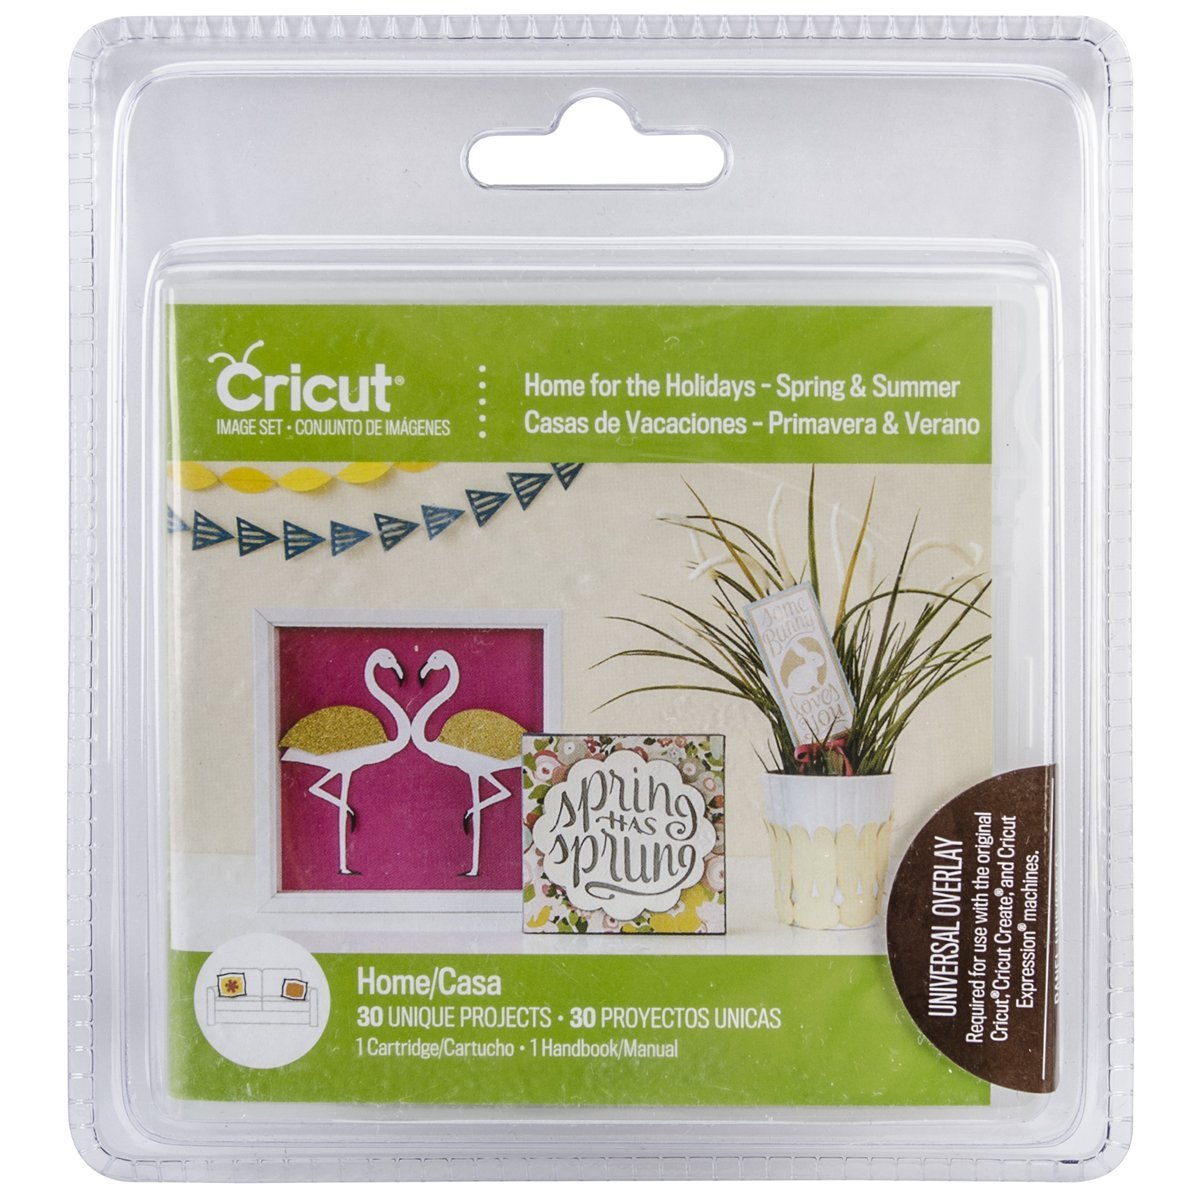 Cricut Cartridge: Home for the Holidays - Spring & Summer